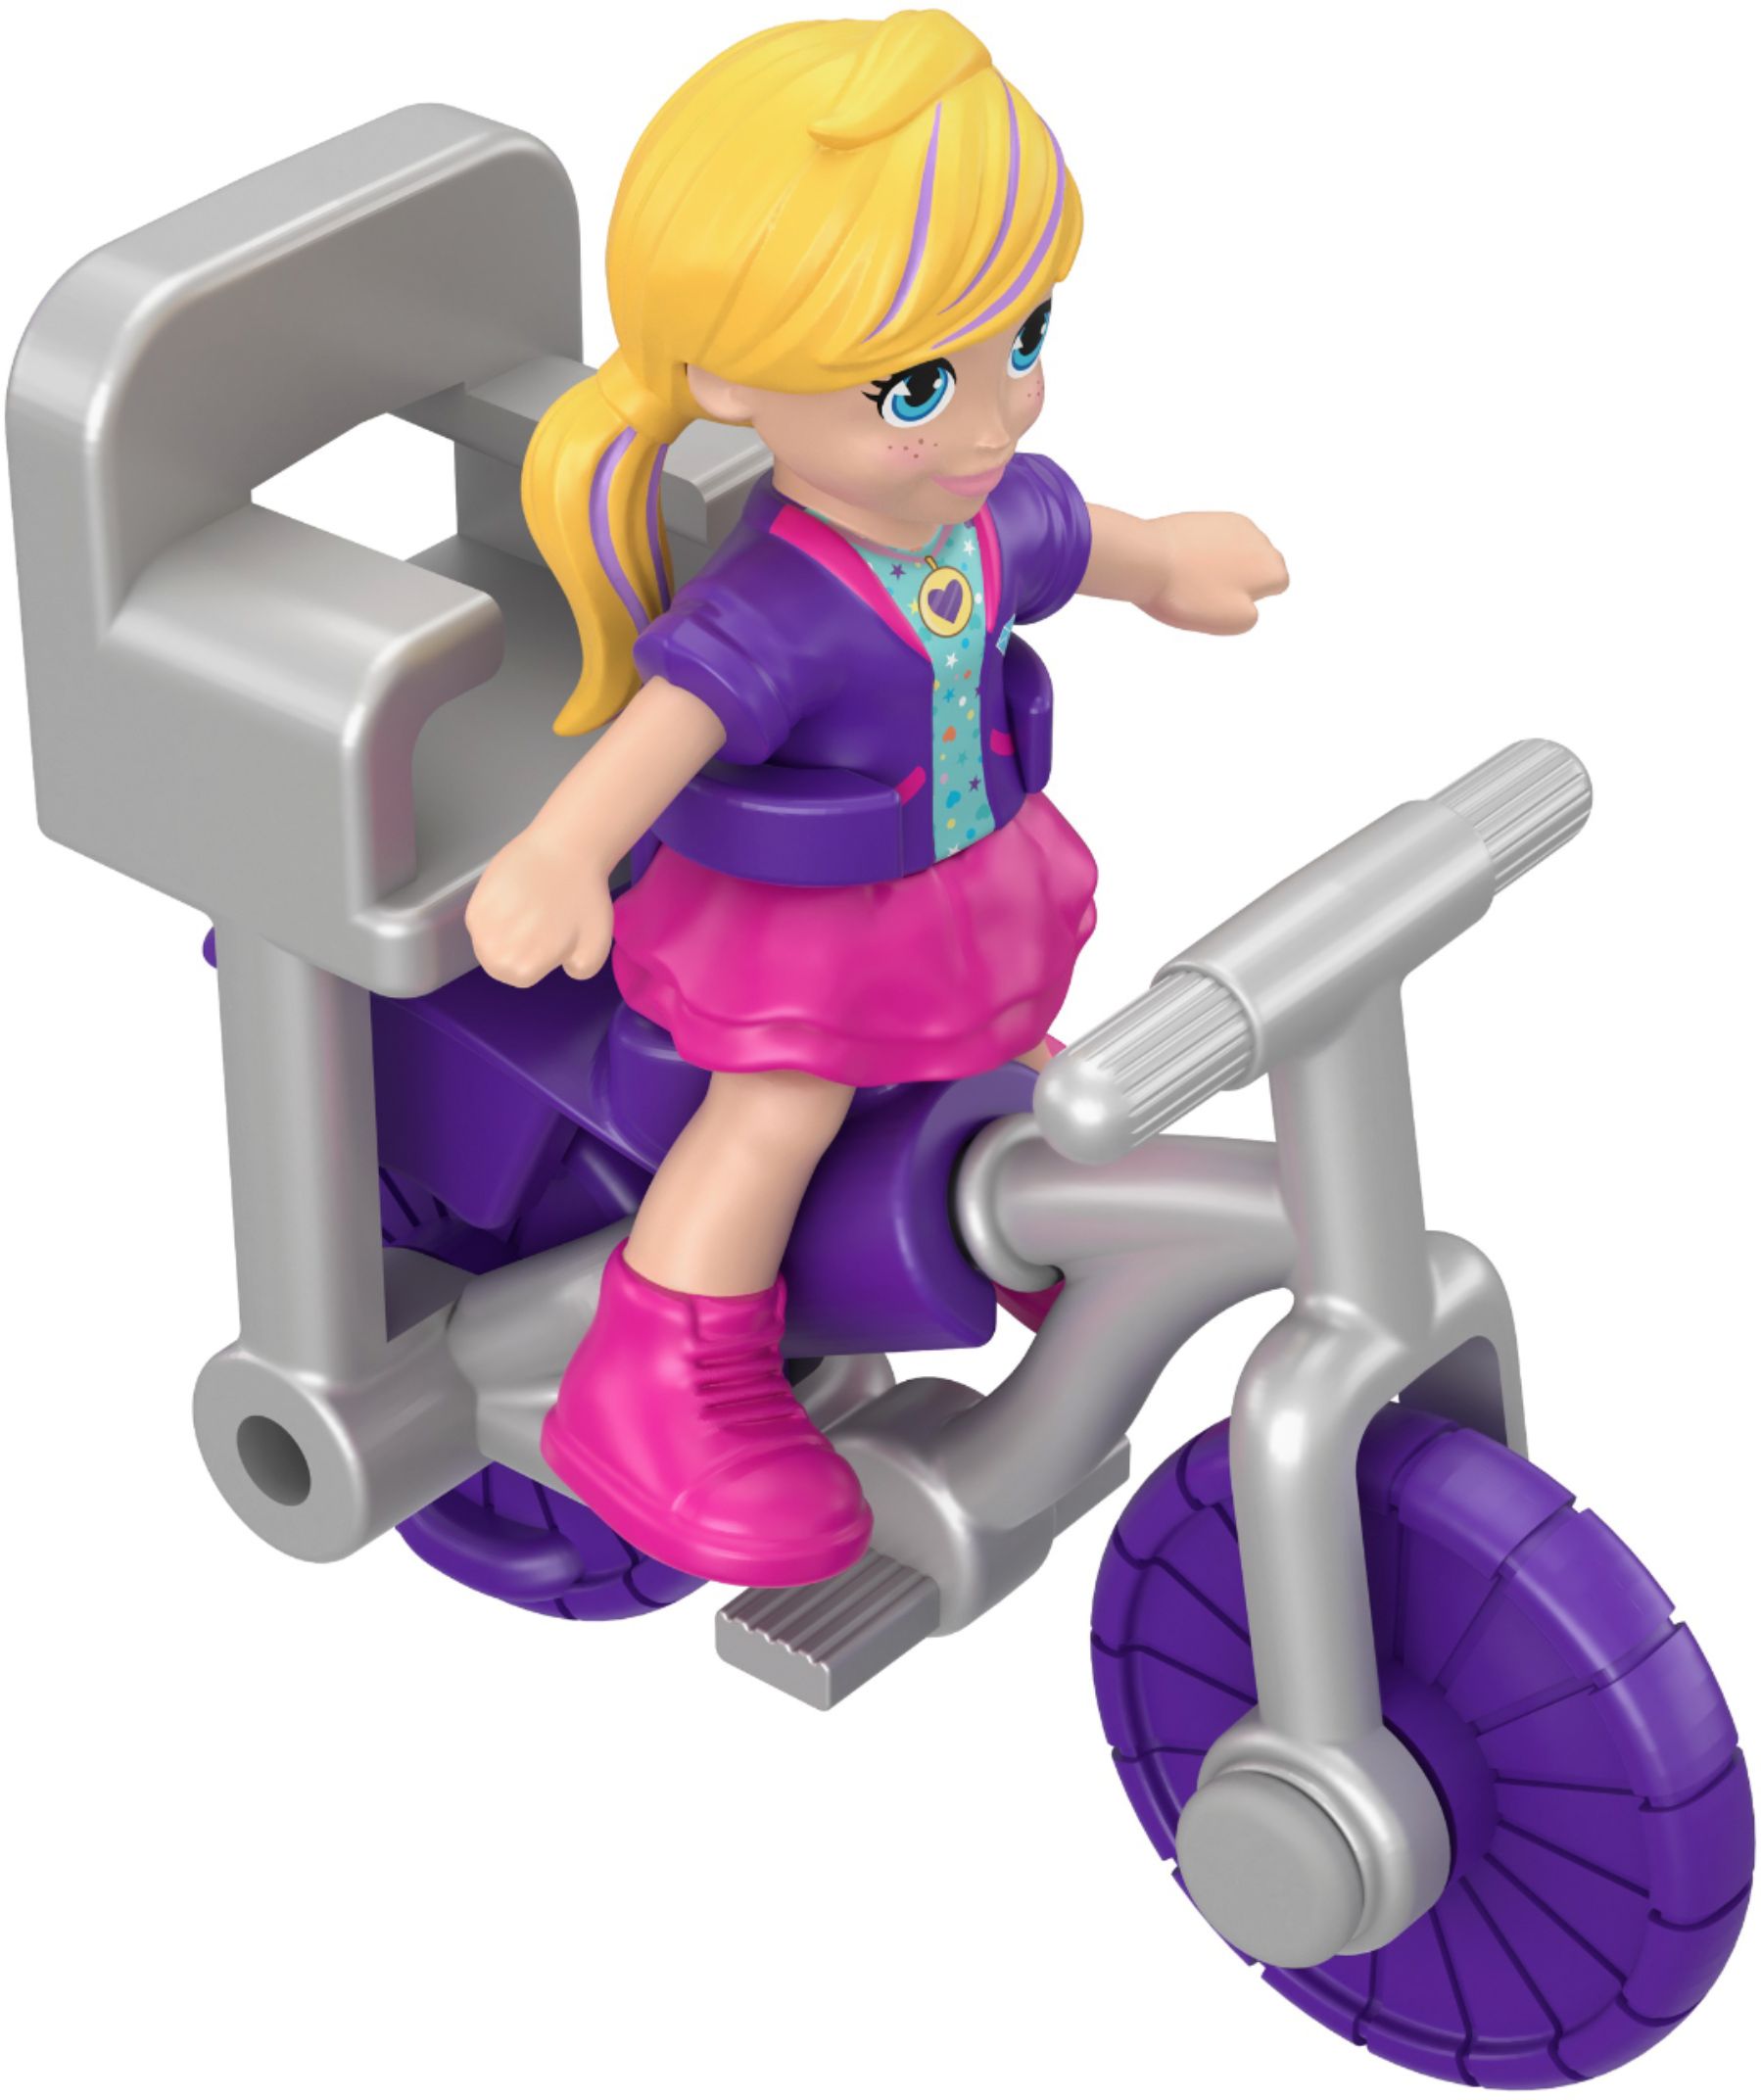 Pictures of polly pocket